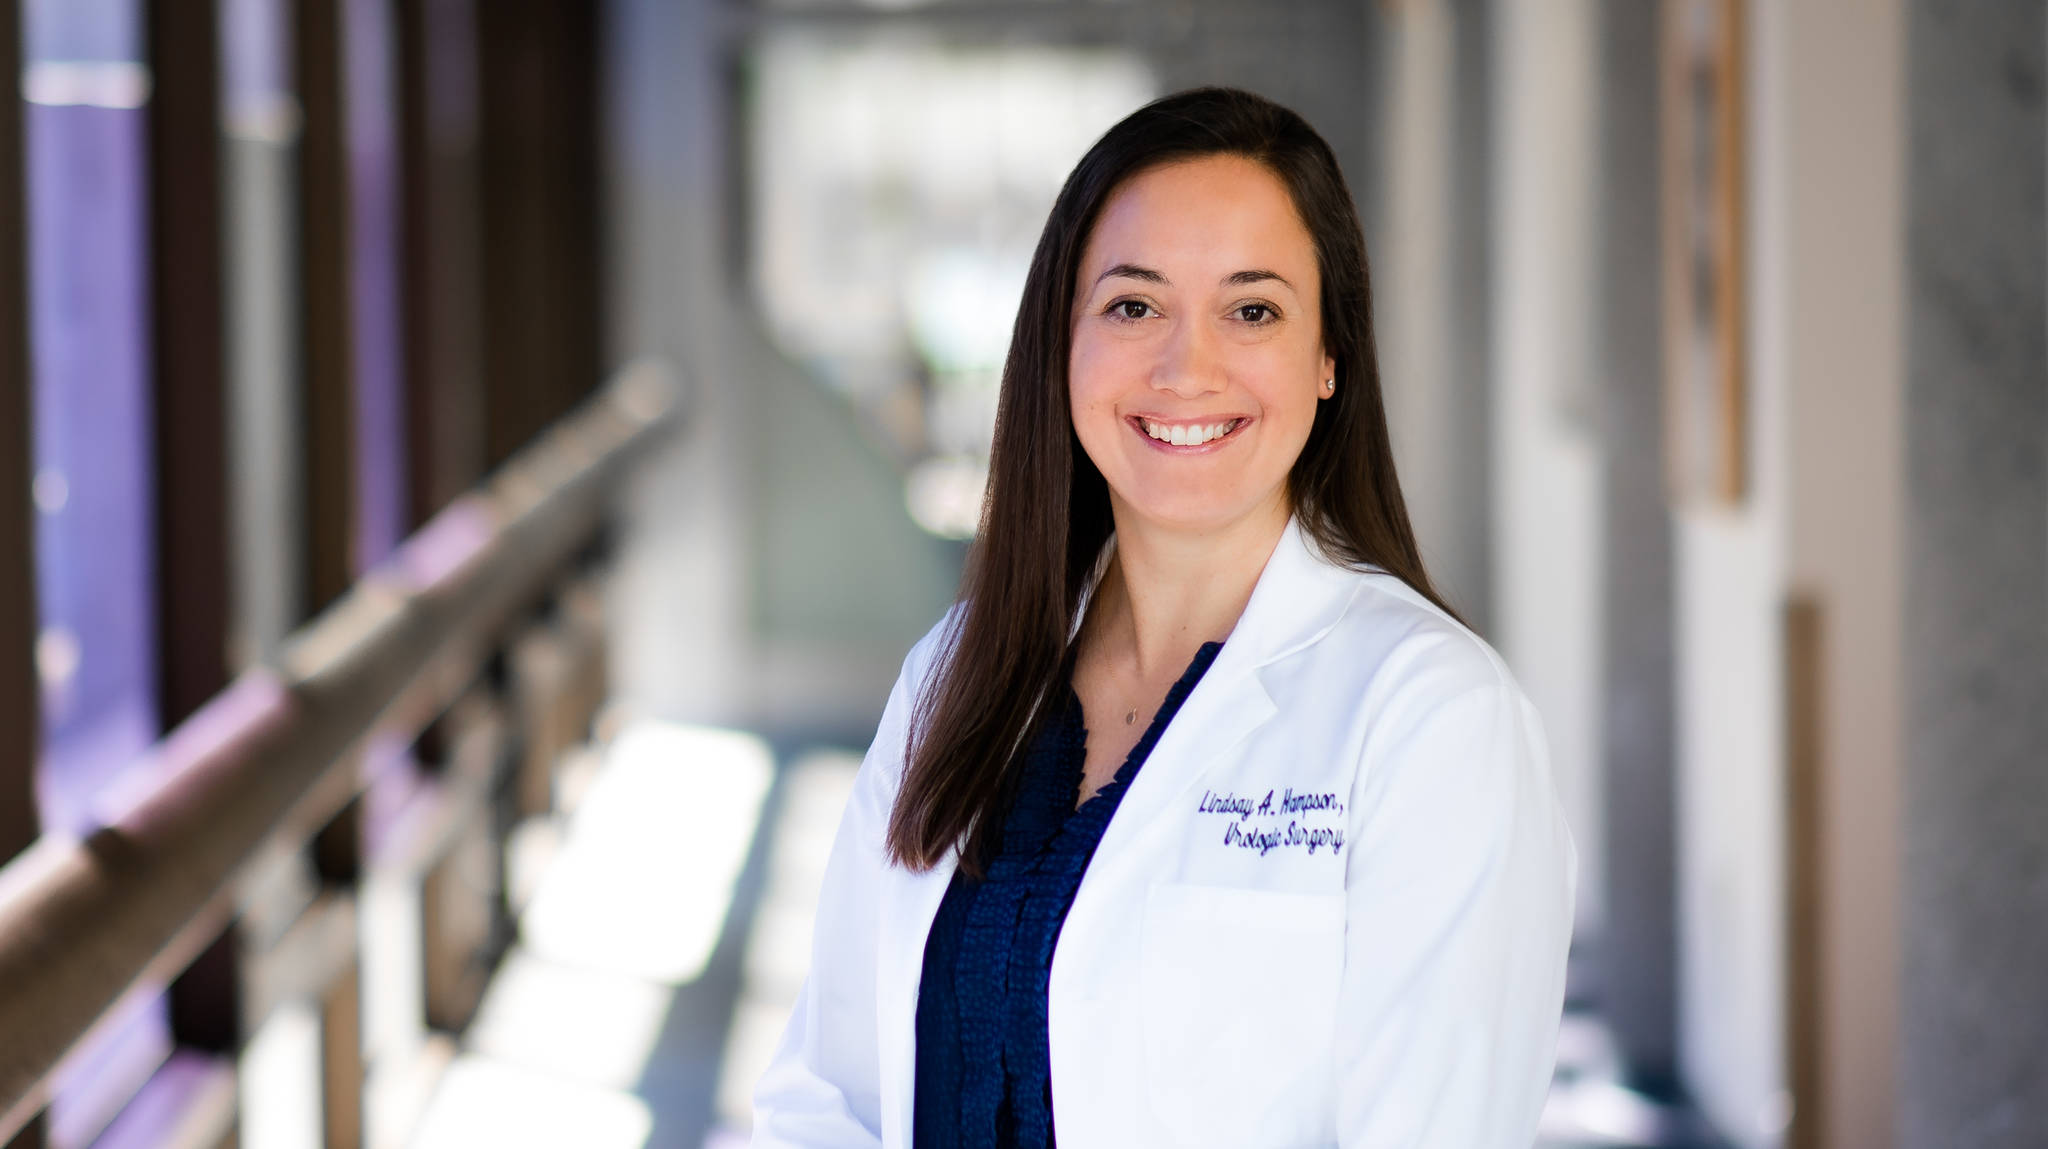 Mercer Island High School alumnus Dr. Lindsay Hampson was named Young Urologist of the Year by the American Urological Association. Photo courtesy of the University of California at San Francisco Department of Urology